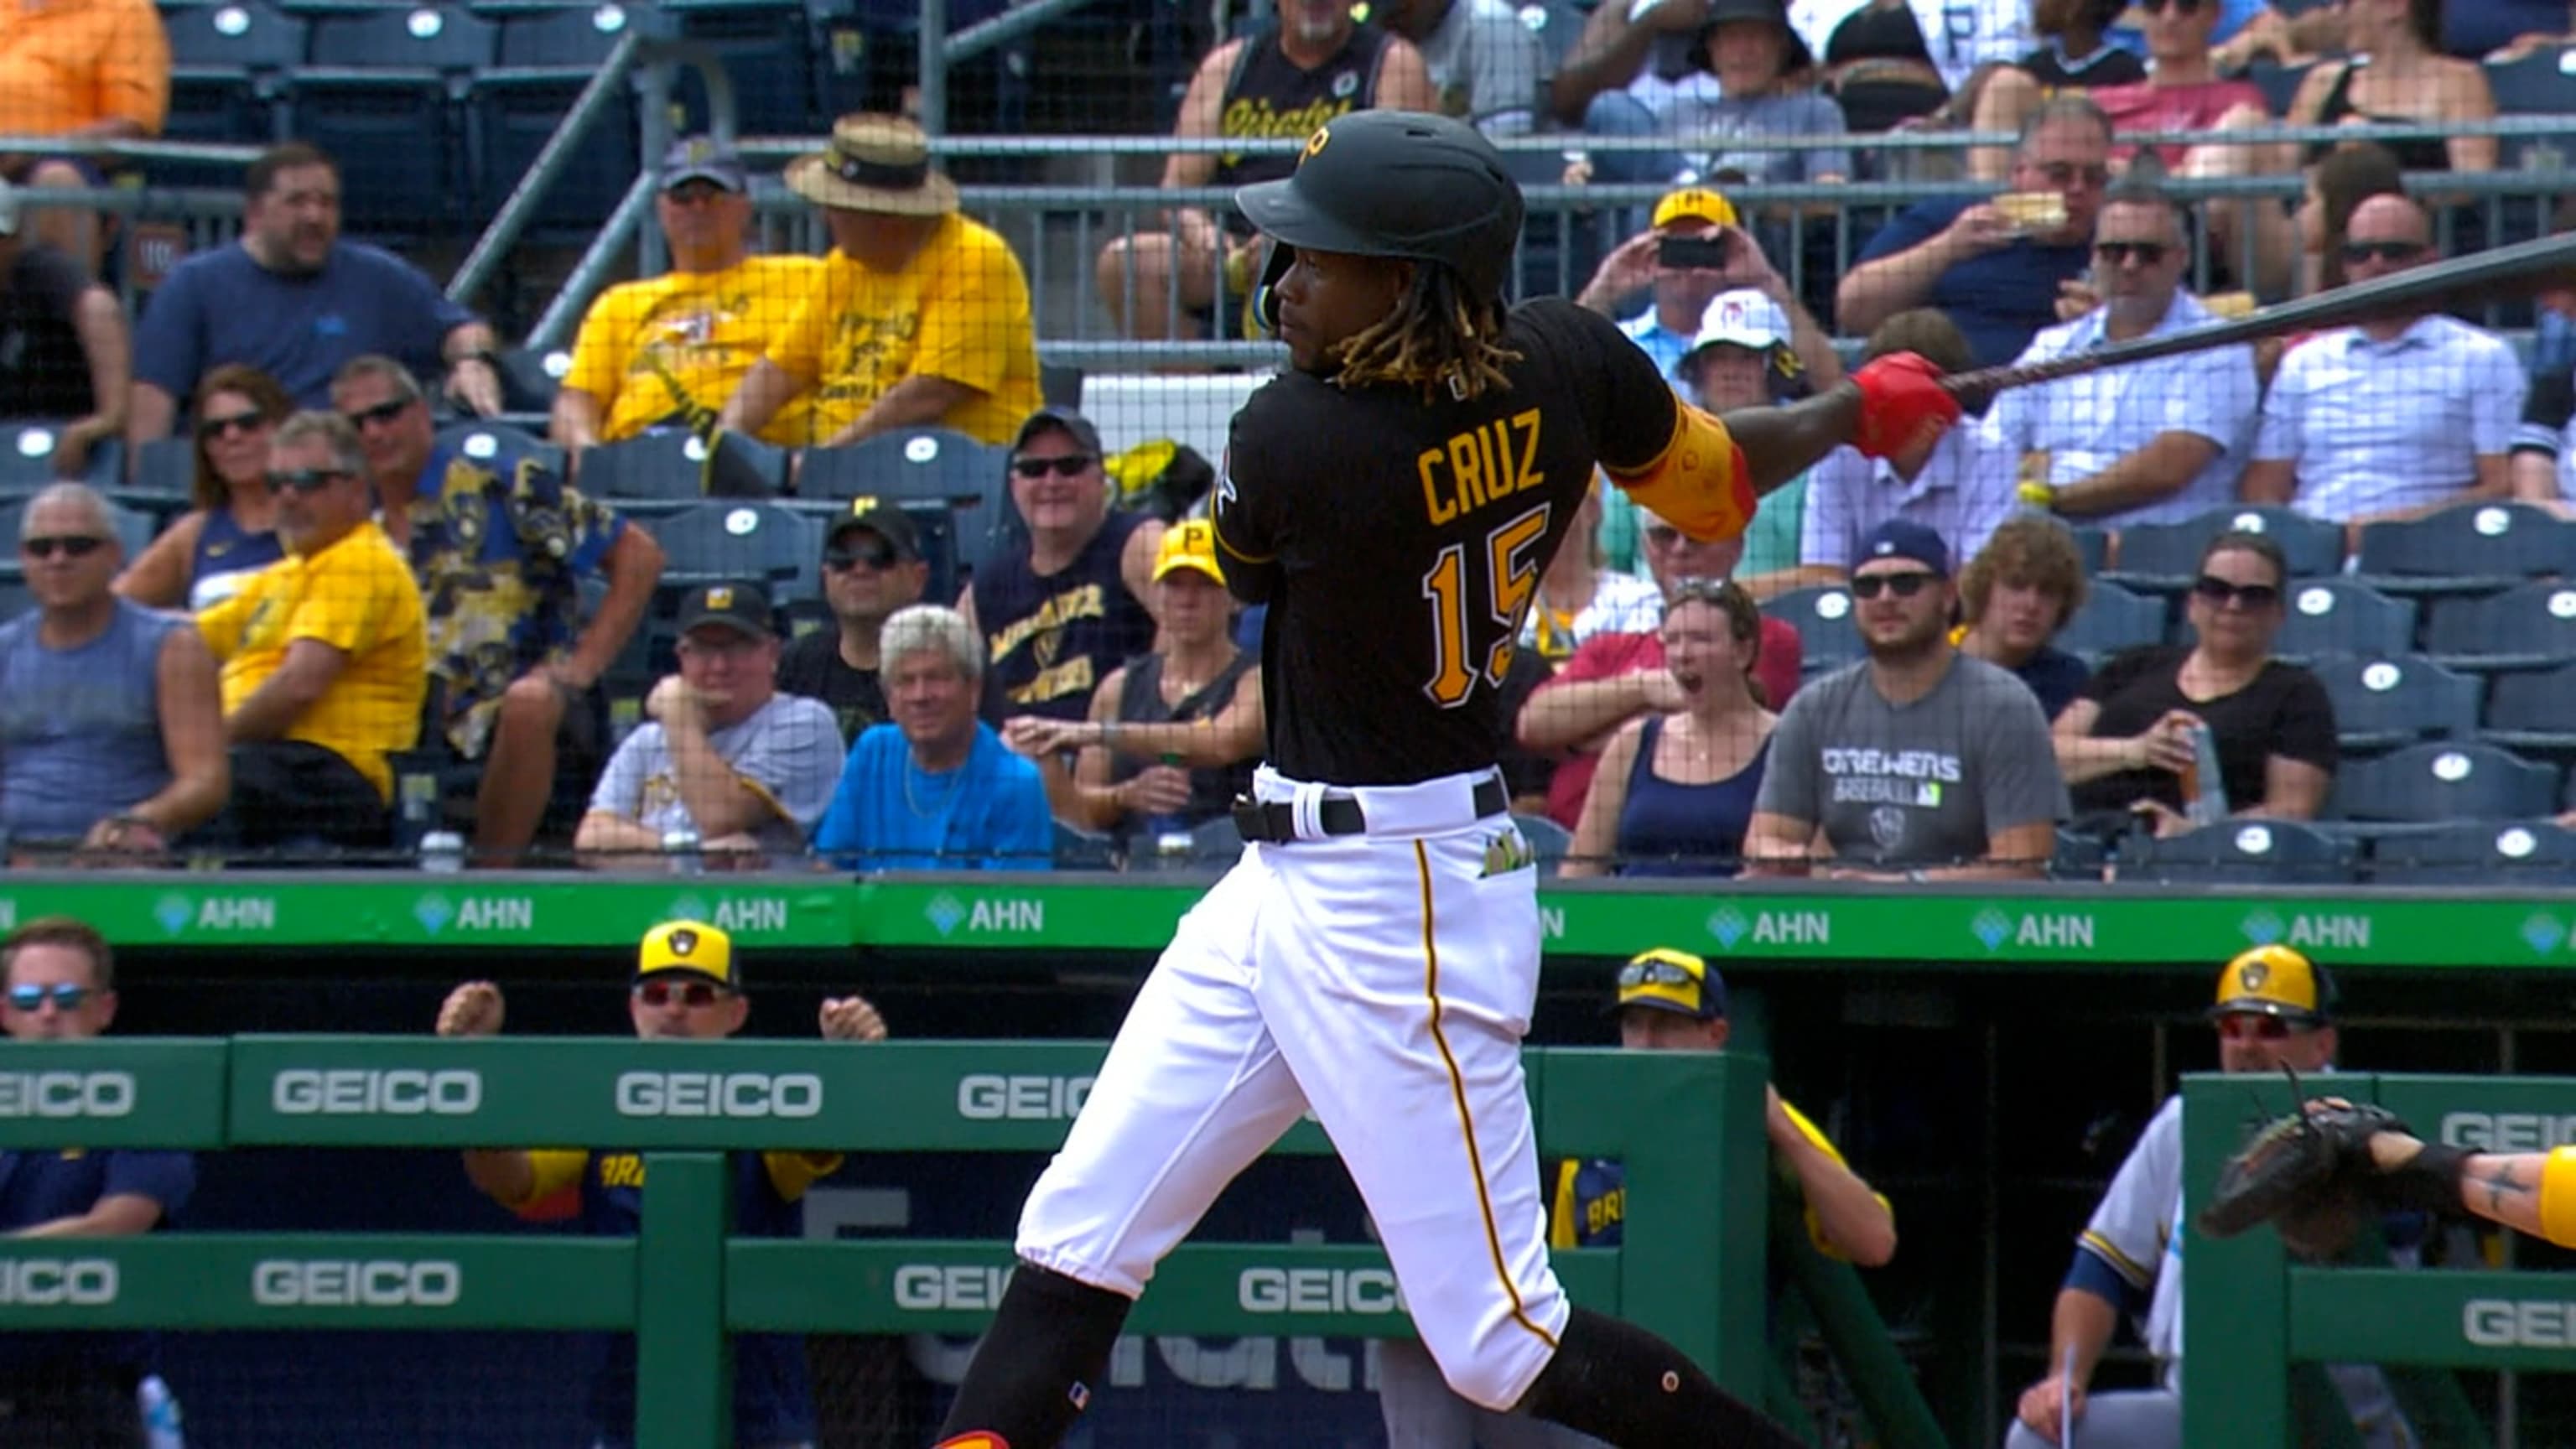 Oneil Cruz's 118 mph homer another Pirates record